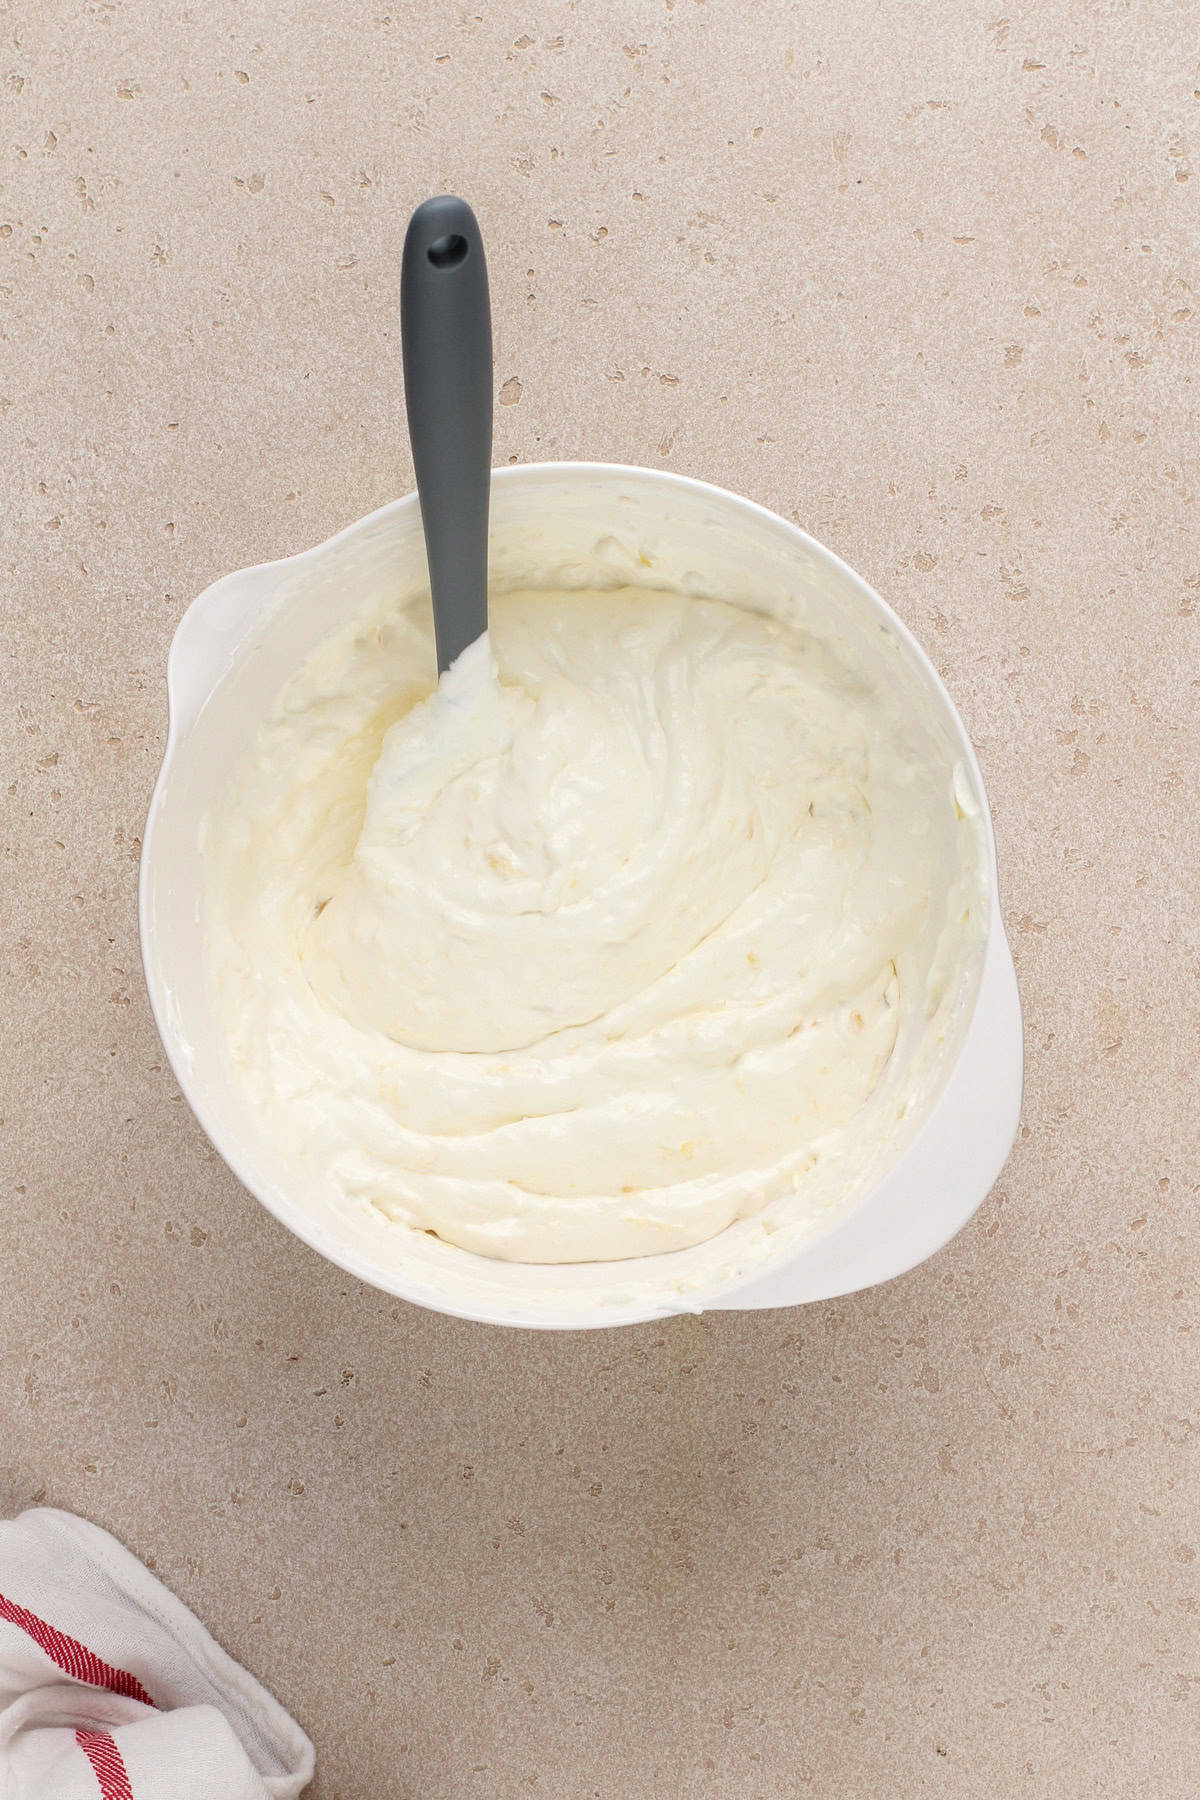 Frosting for easy pineapple cake mixed together in a white bowl.